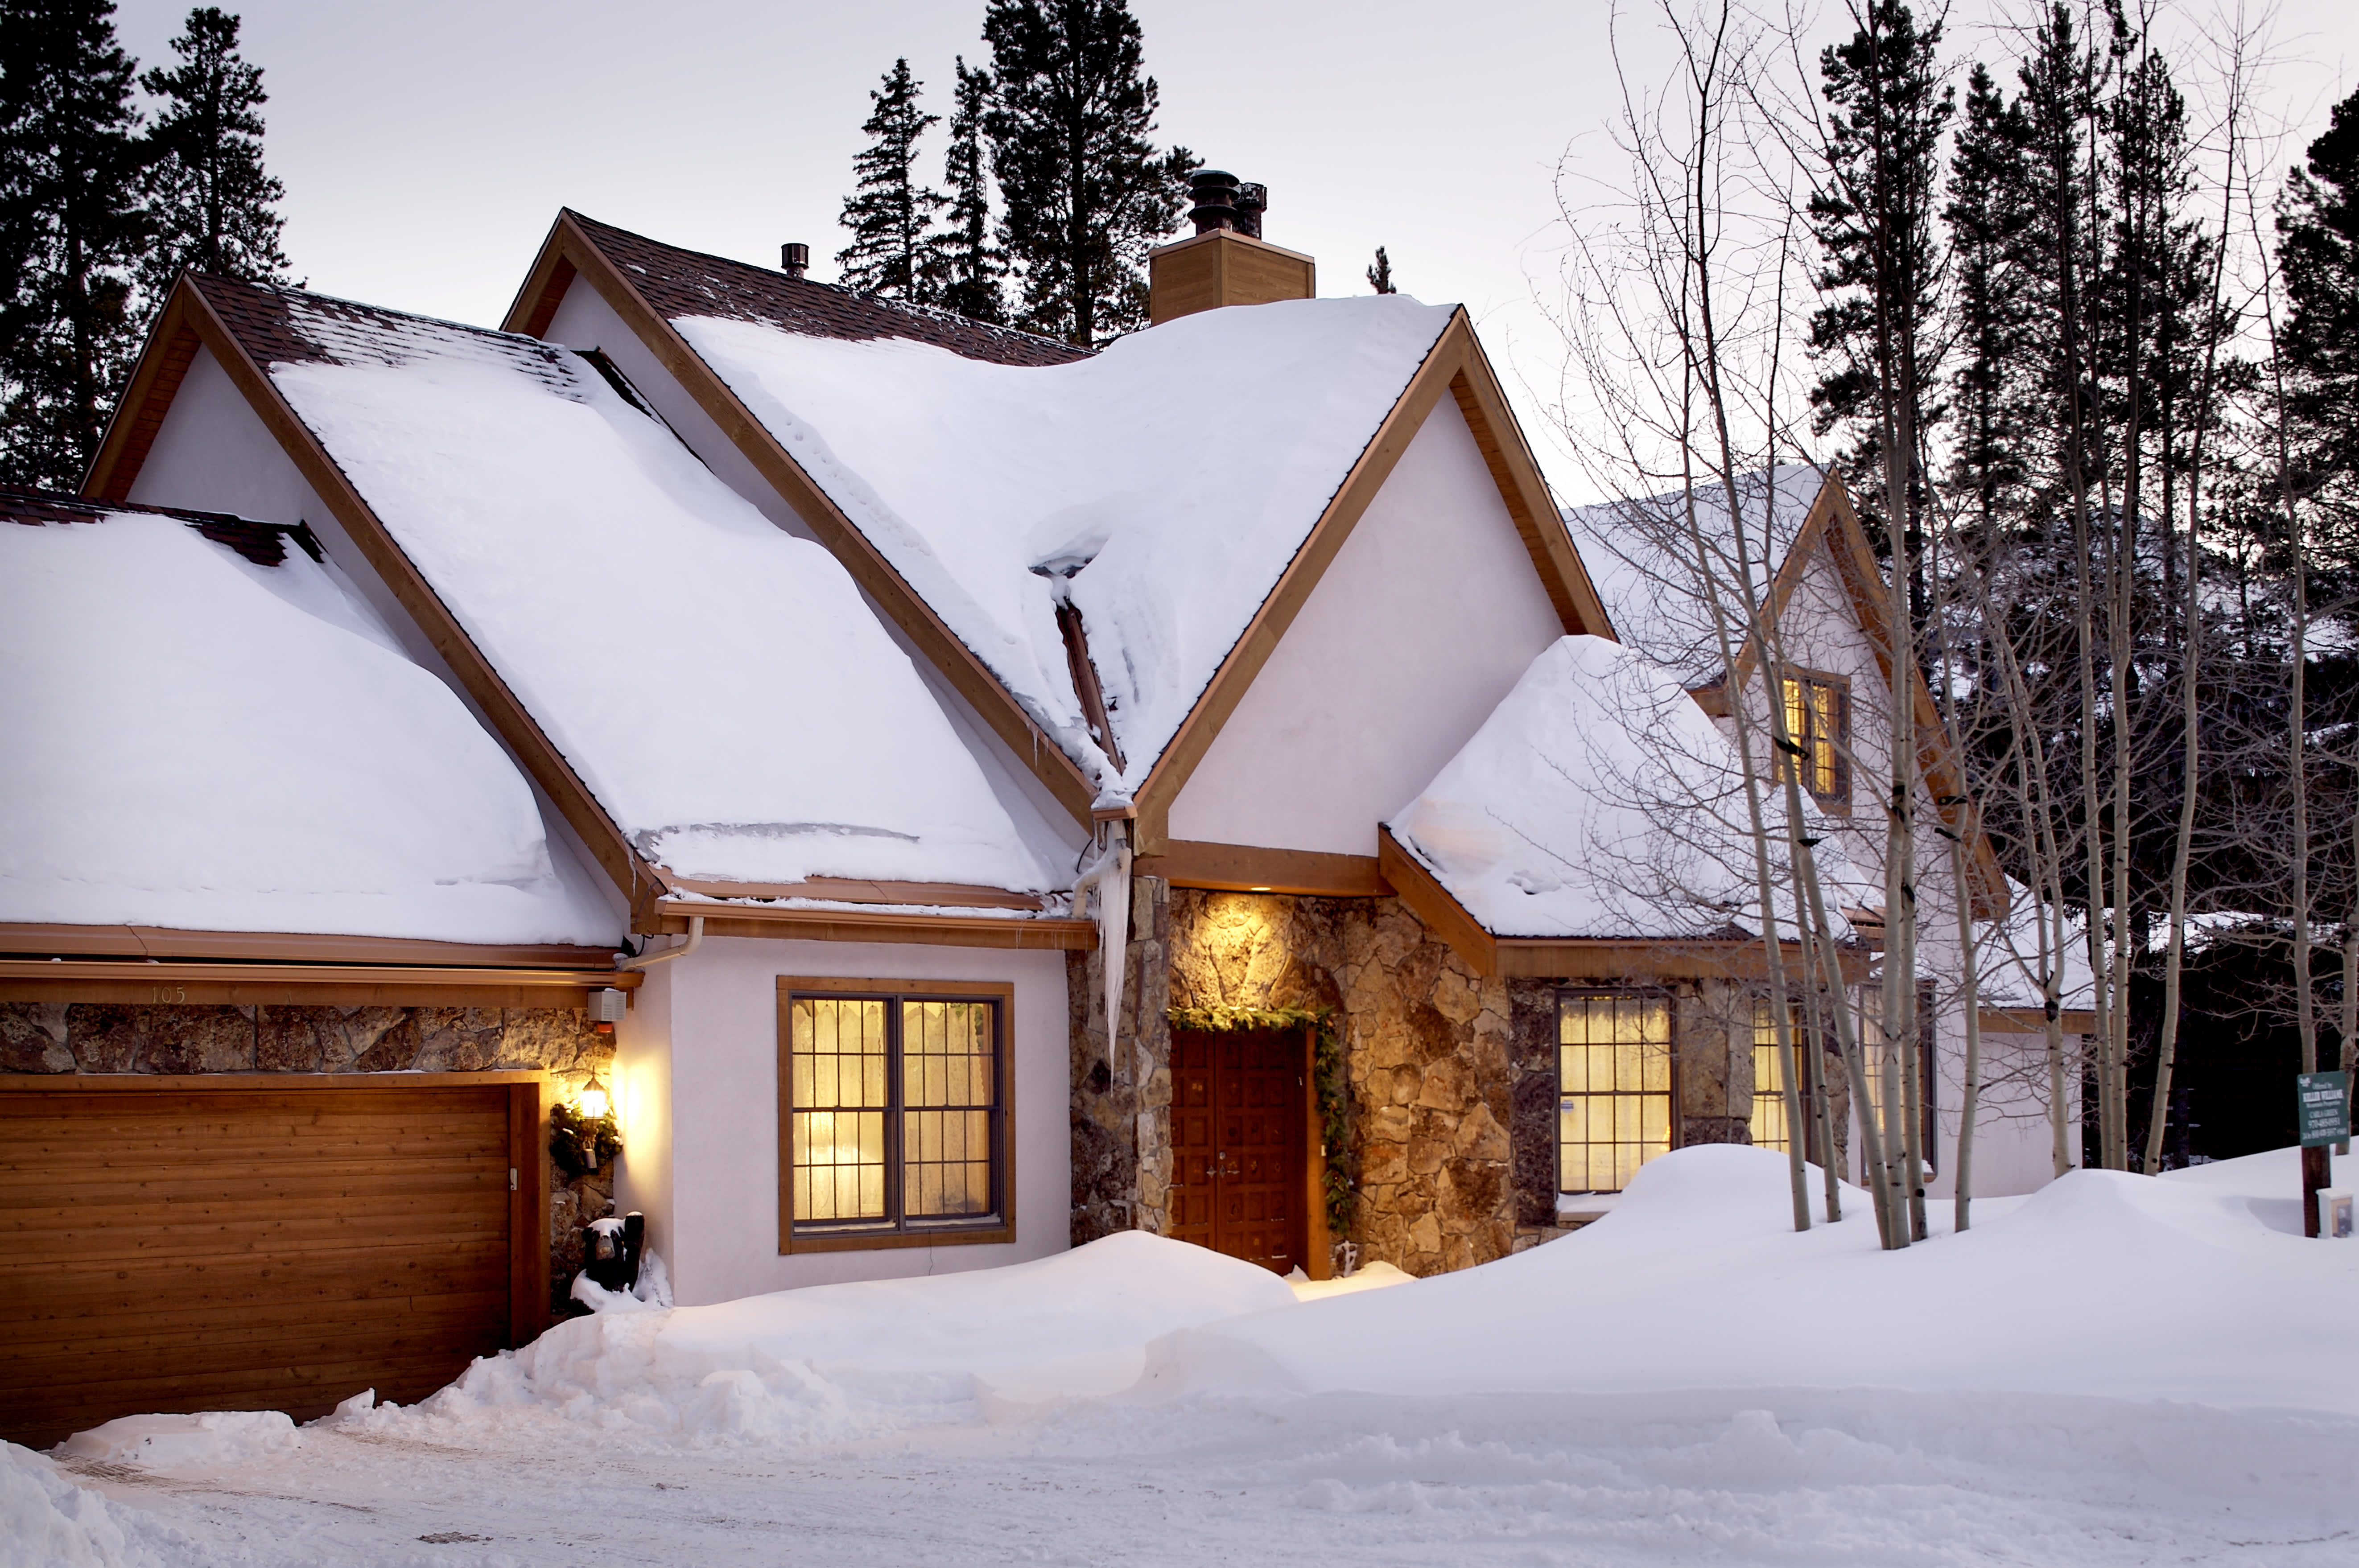 Here are the top spots to shop for the winter vacation home of your dreams